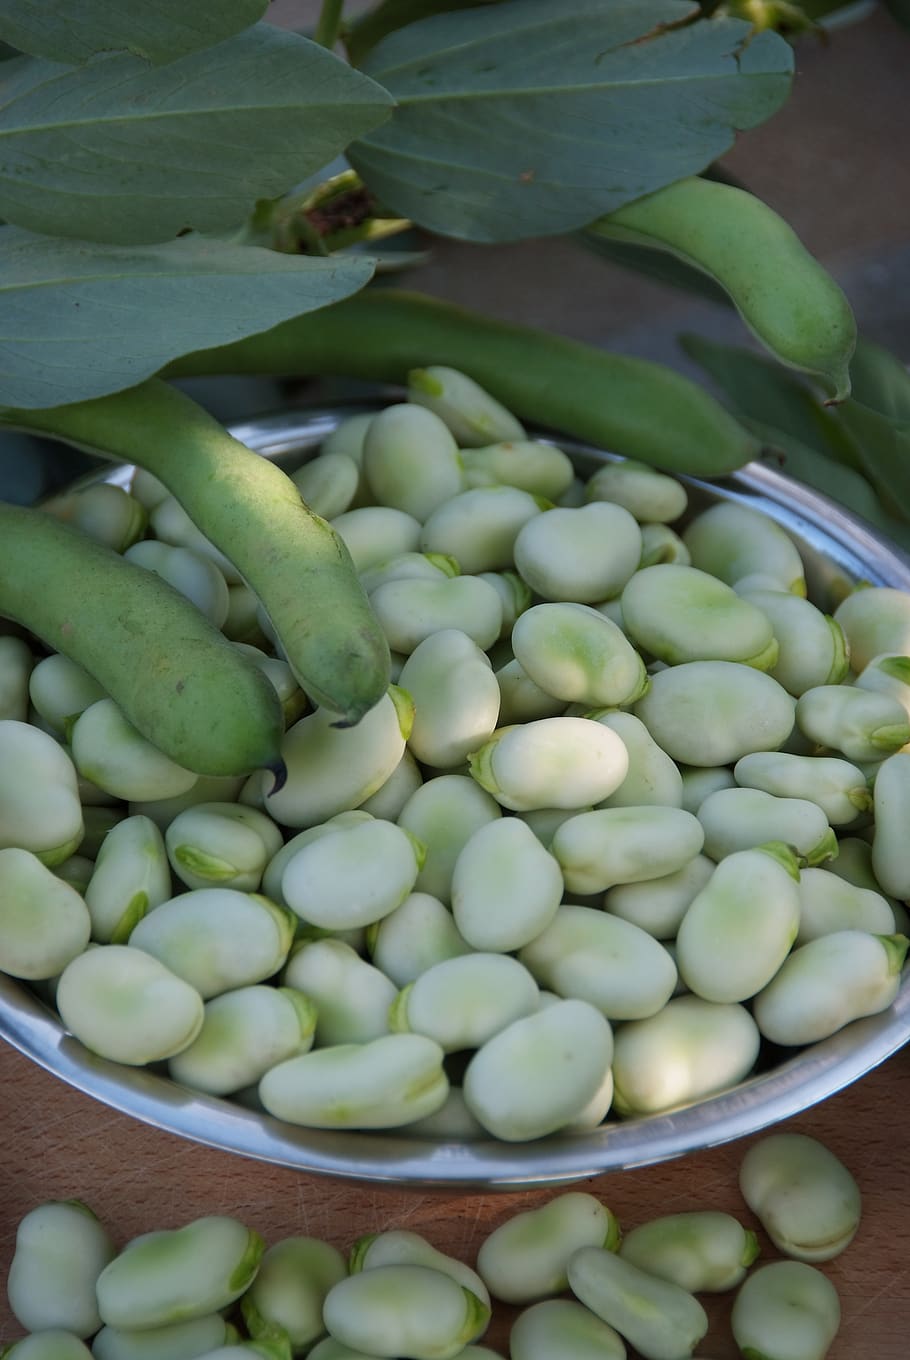 broad bean, pod, green, seeds, fresh, leaf, healthy eating, food and drink, food, green color